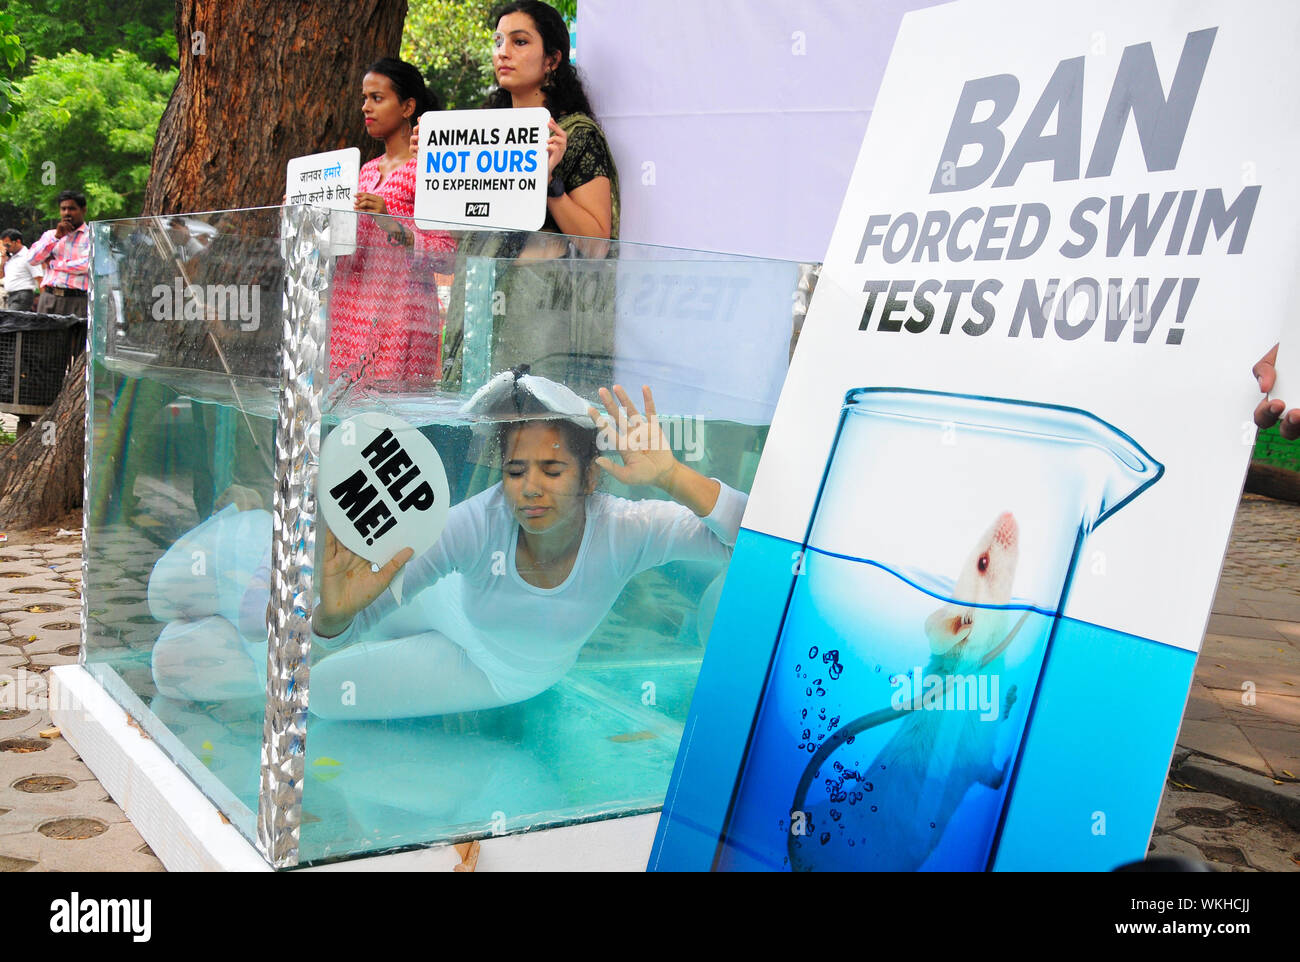 Animal right activist from PETA during a protest in a tank of water to call  for